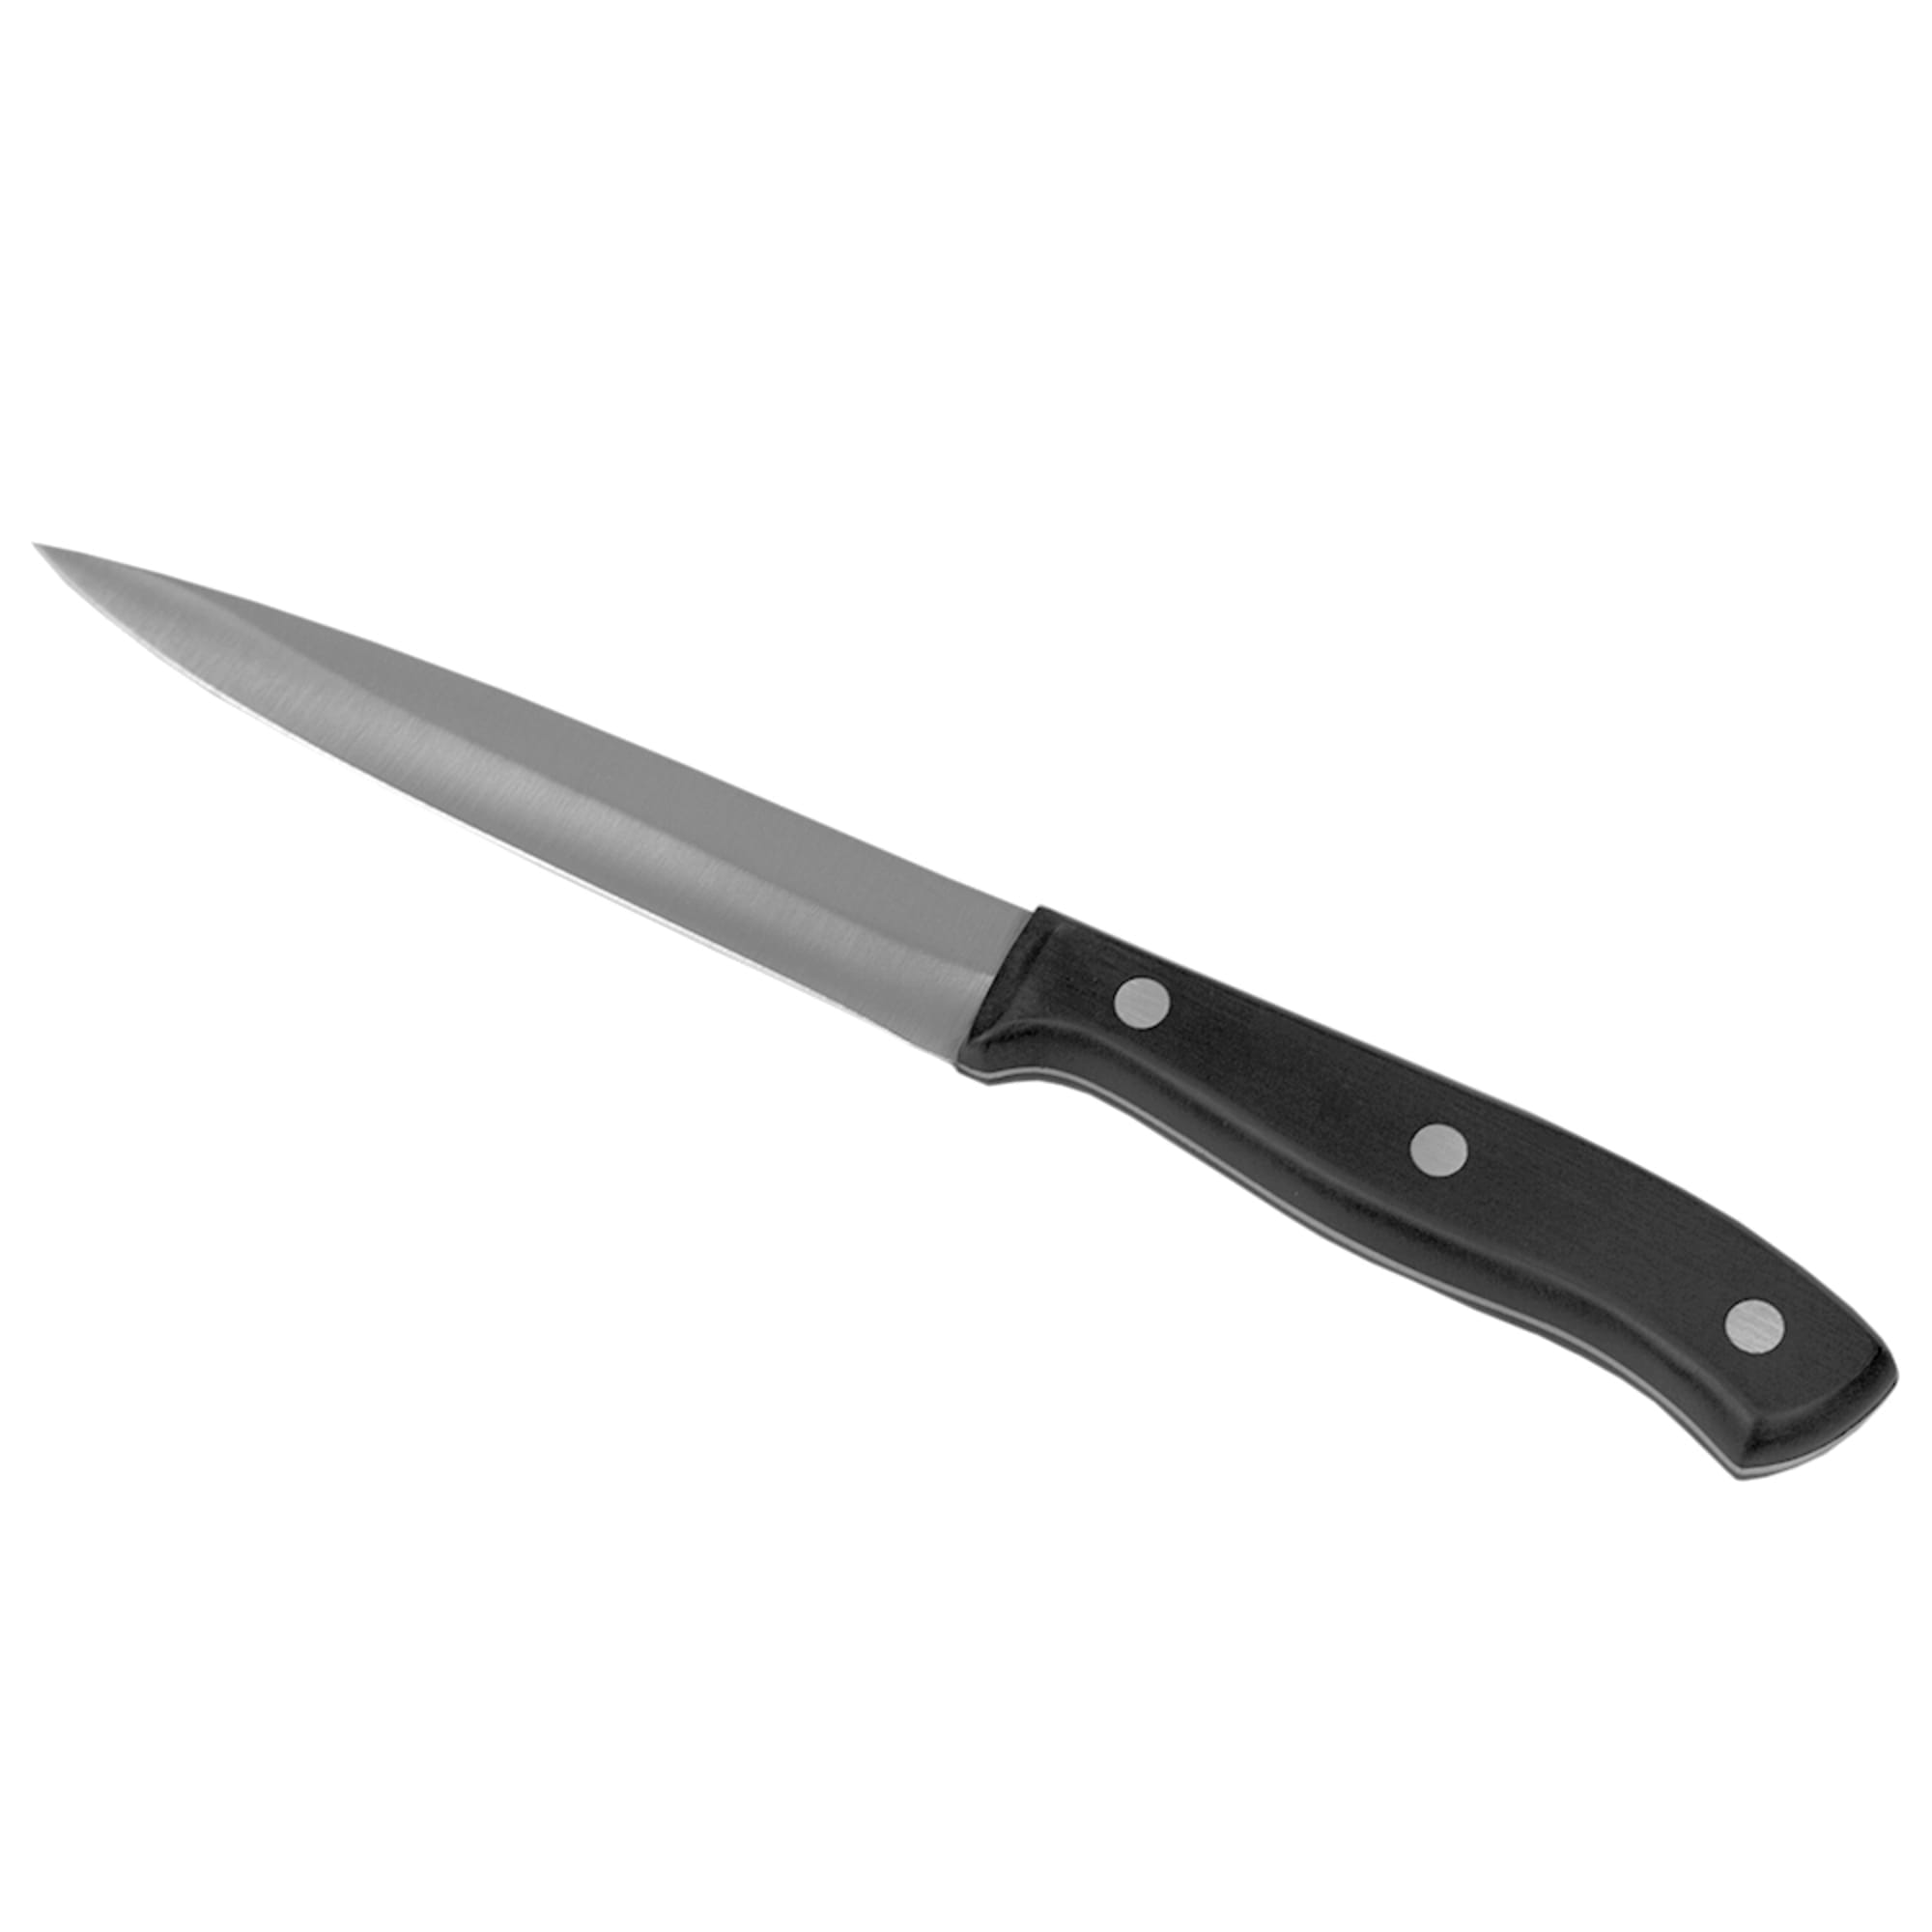 Home Basics 5" Stainless Steel Utility Knife with Contoured Bakelite Handle, Black $2.00 EACH, CASE PACK OF 24